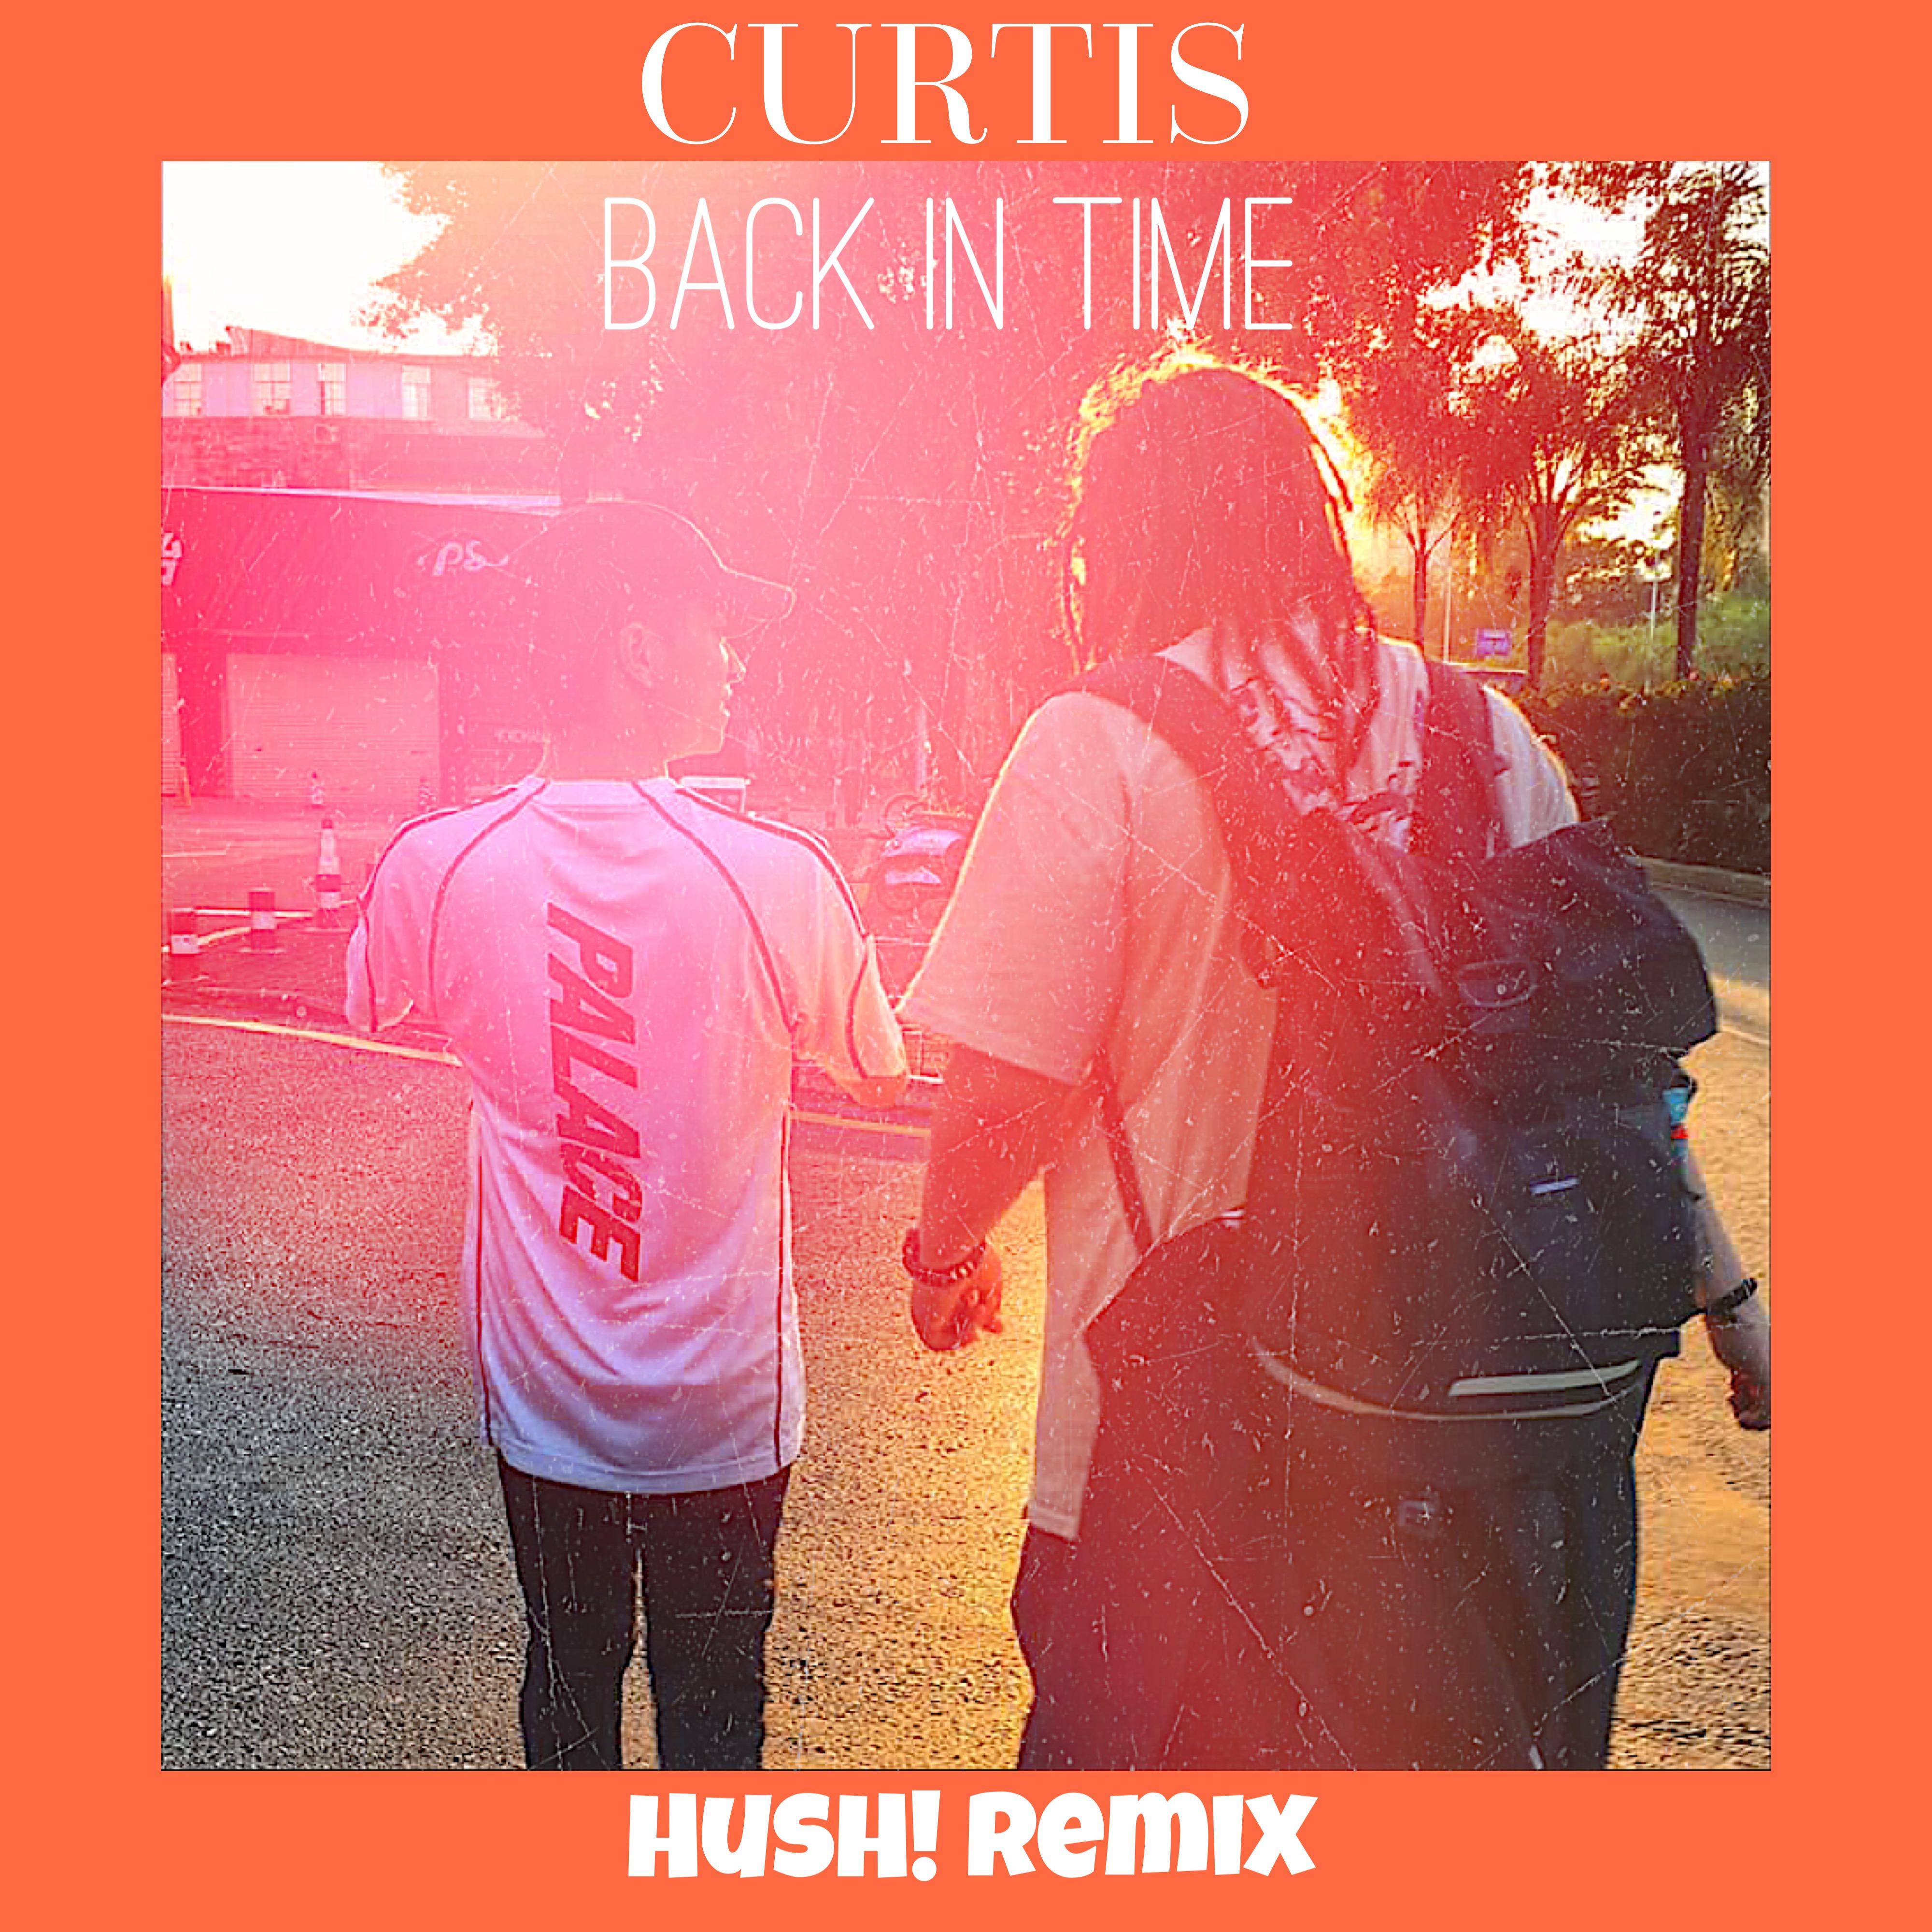 Back In Time (HusH! Remix)